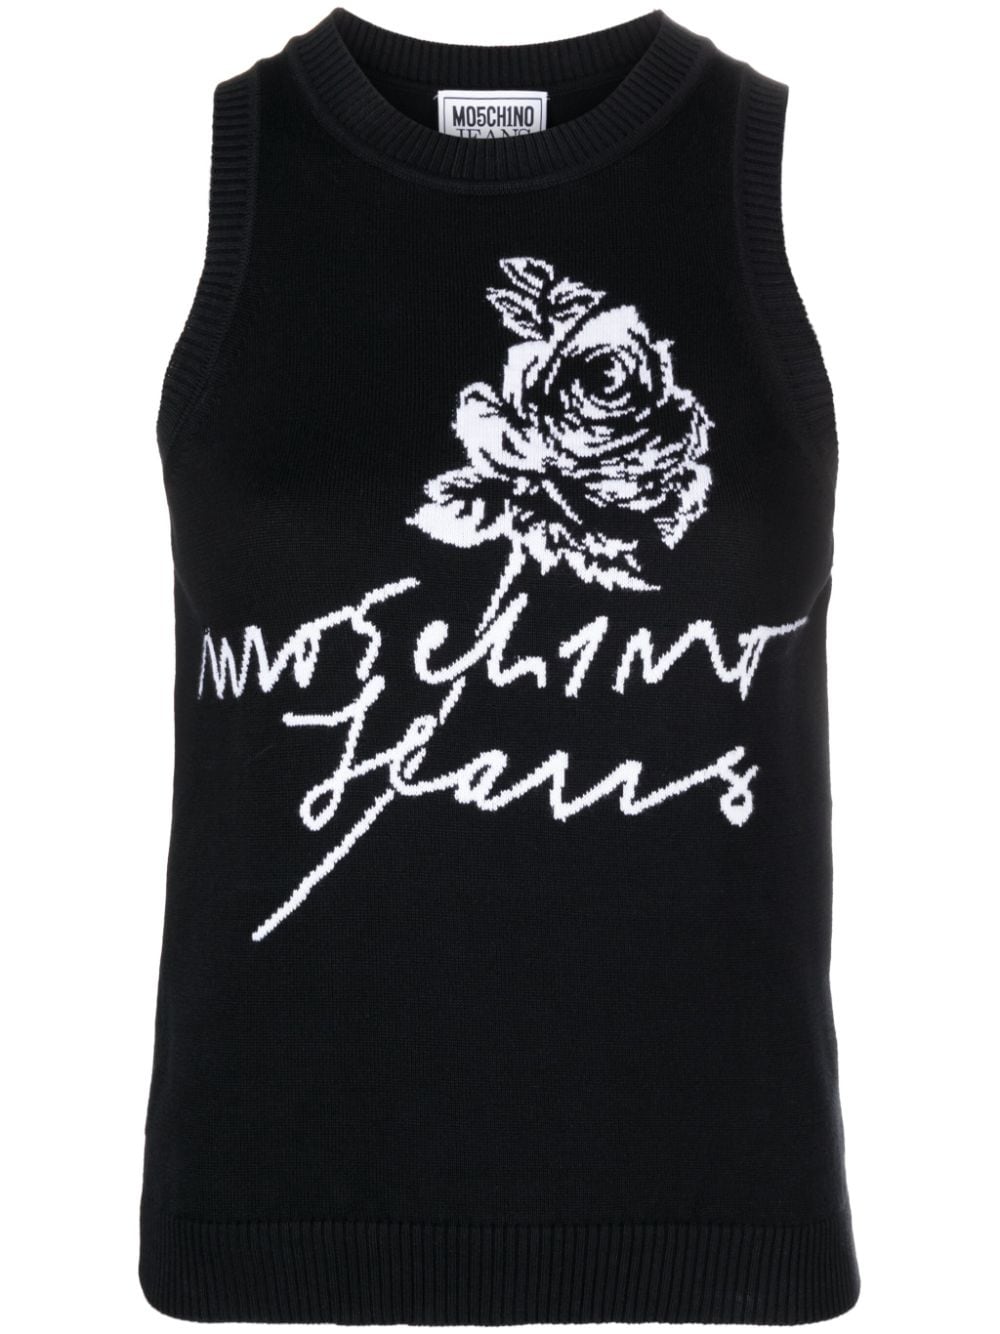 MOSCHINO JEANS rose-jacquard knitted tank top - Black von MOSCHINO JEANS